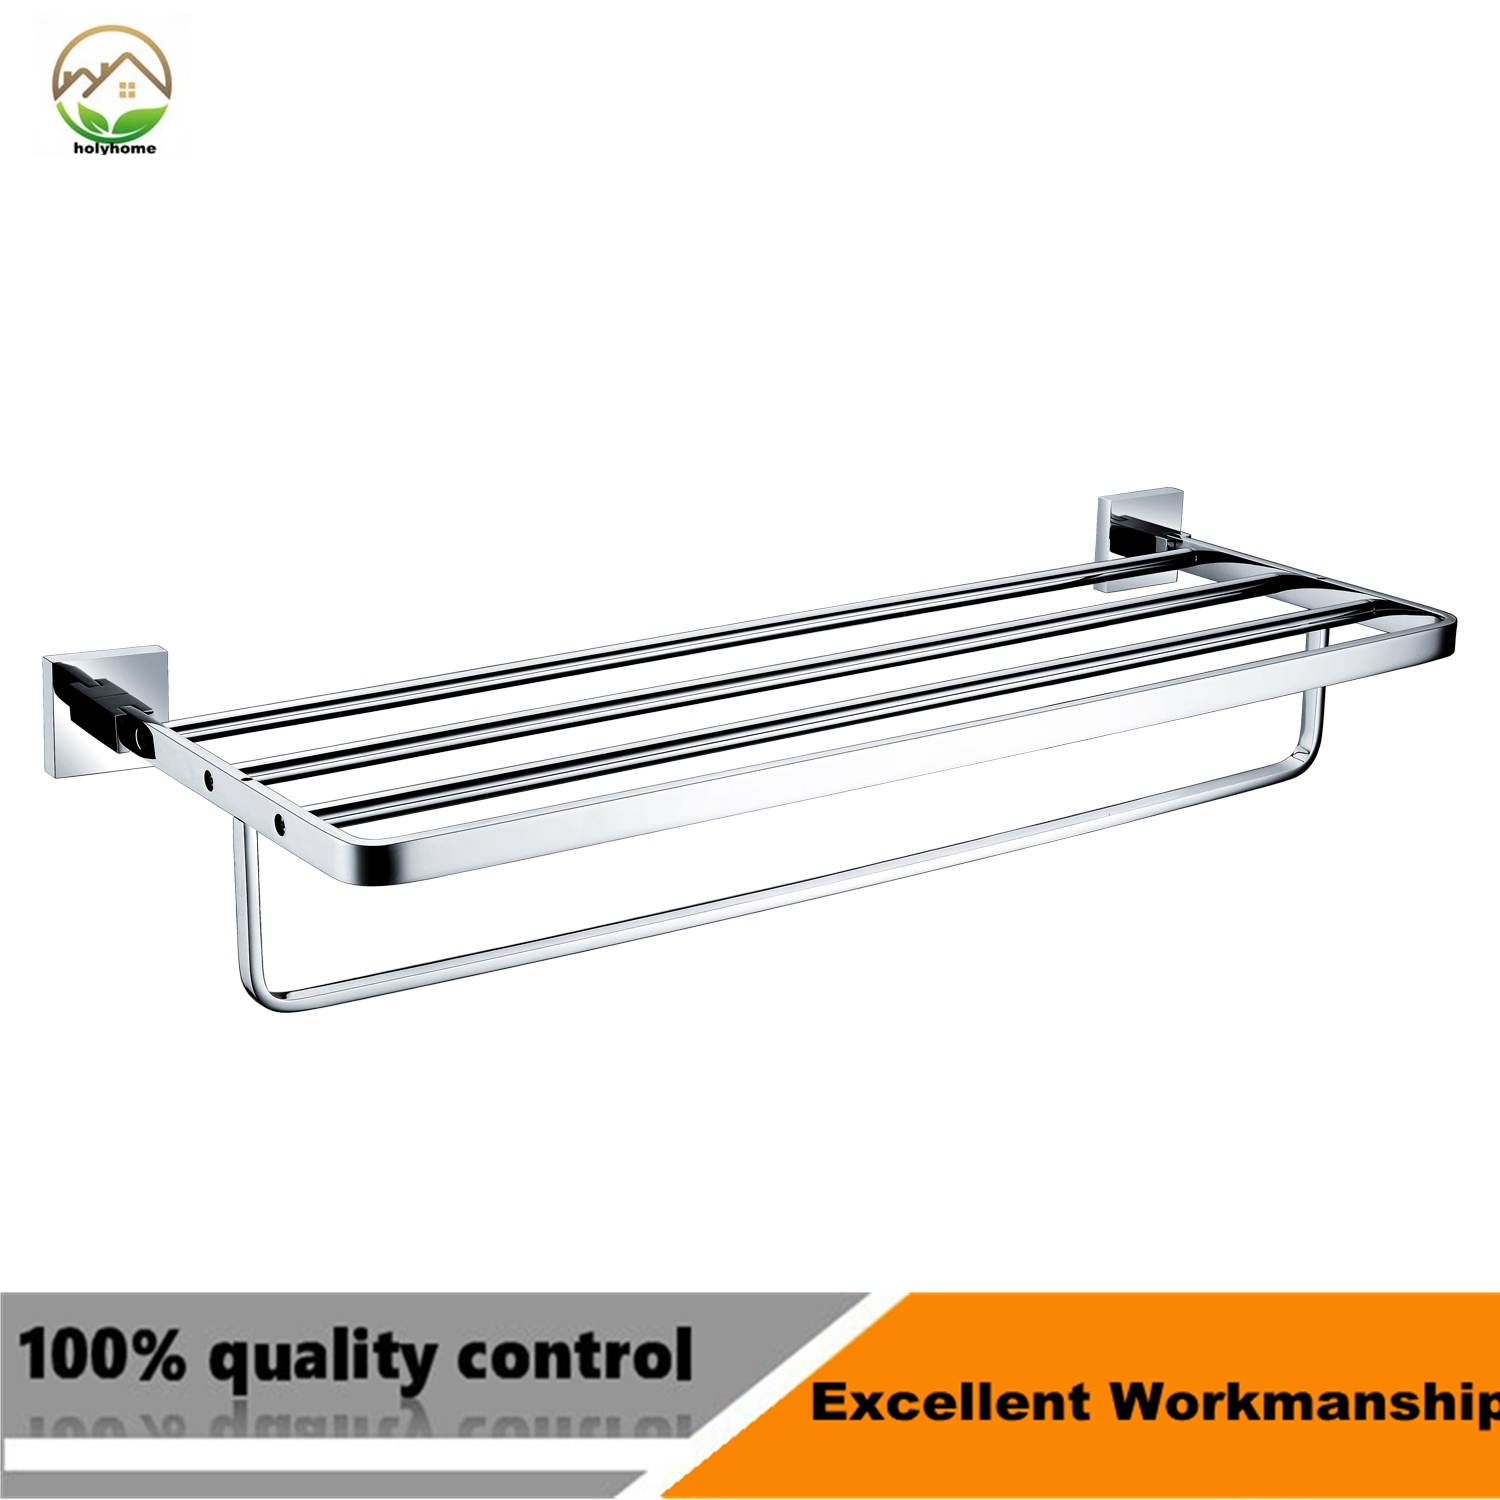 Factory Supplier Stainless Steel Single Towel Bar for The Bathroom